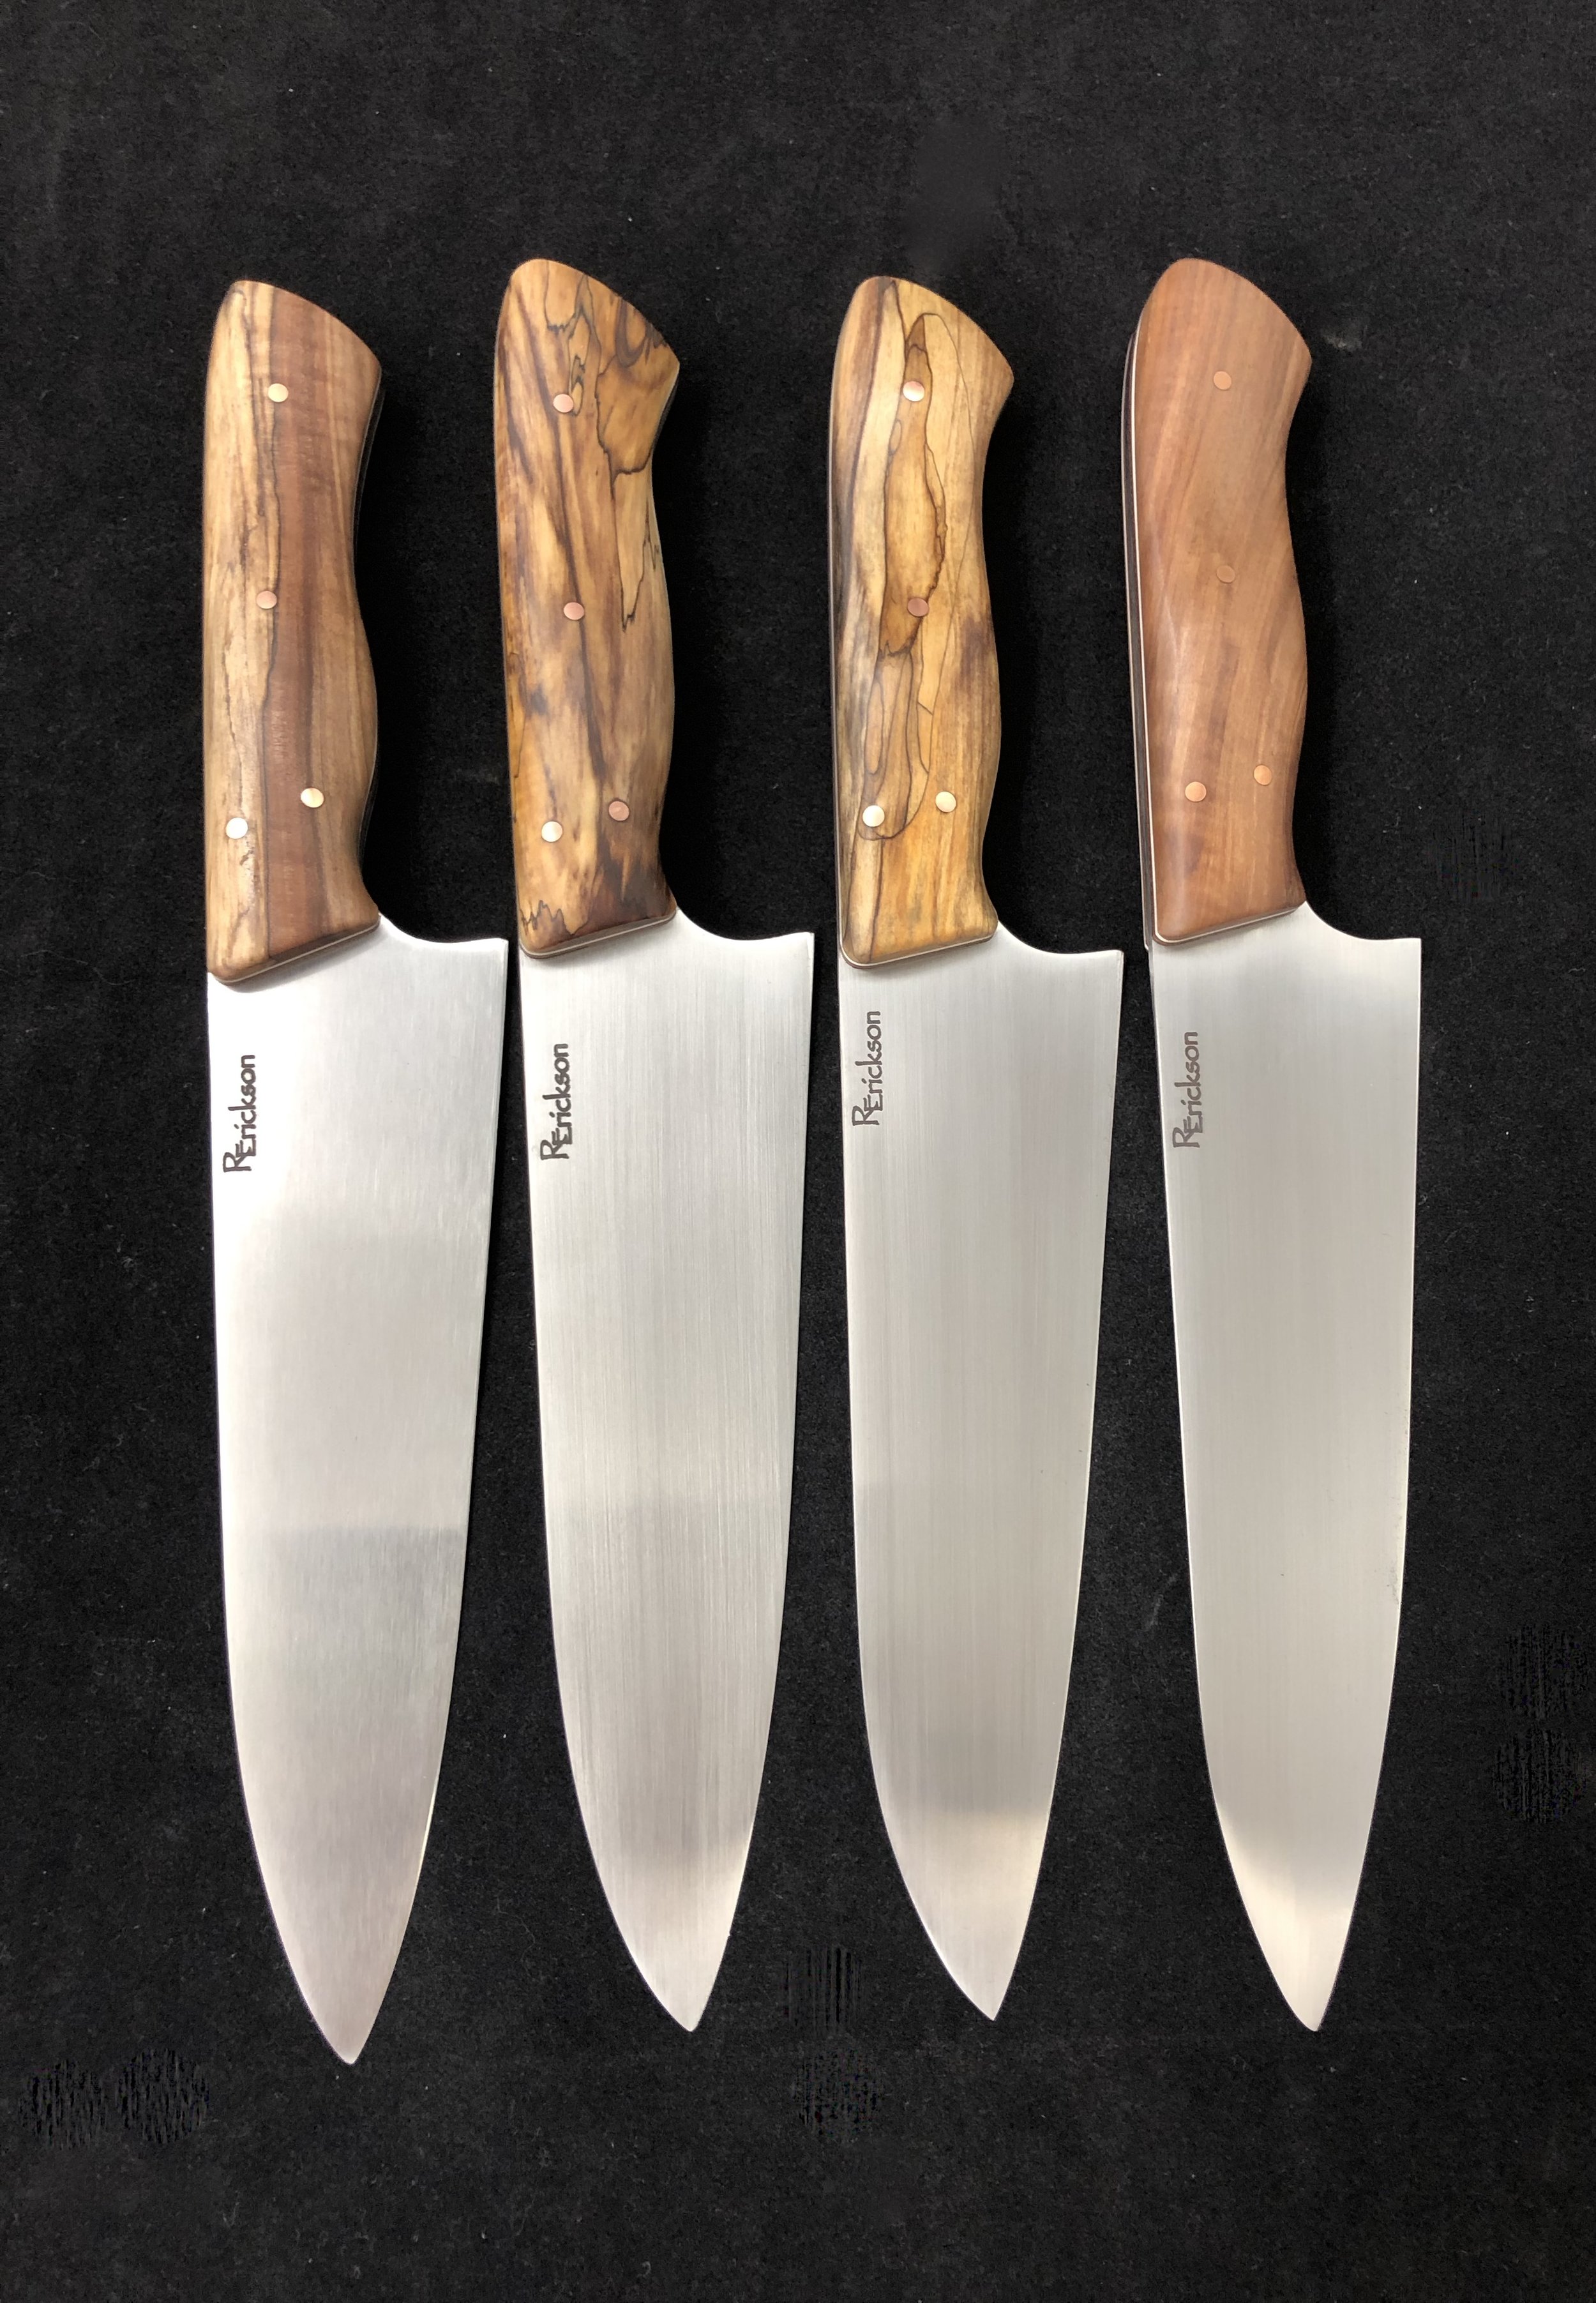 Western style chef knives